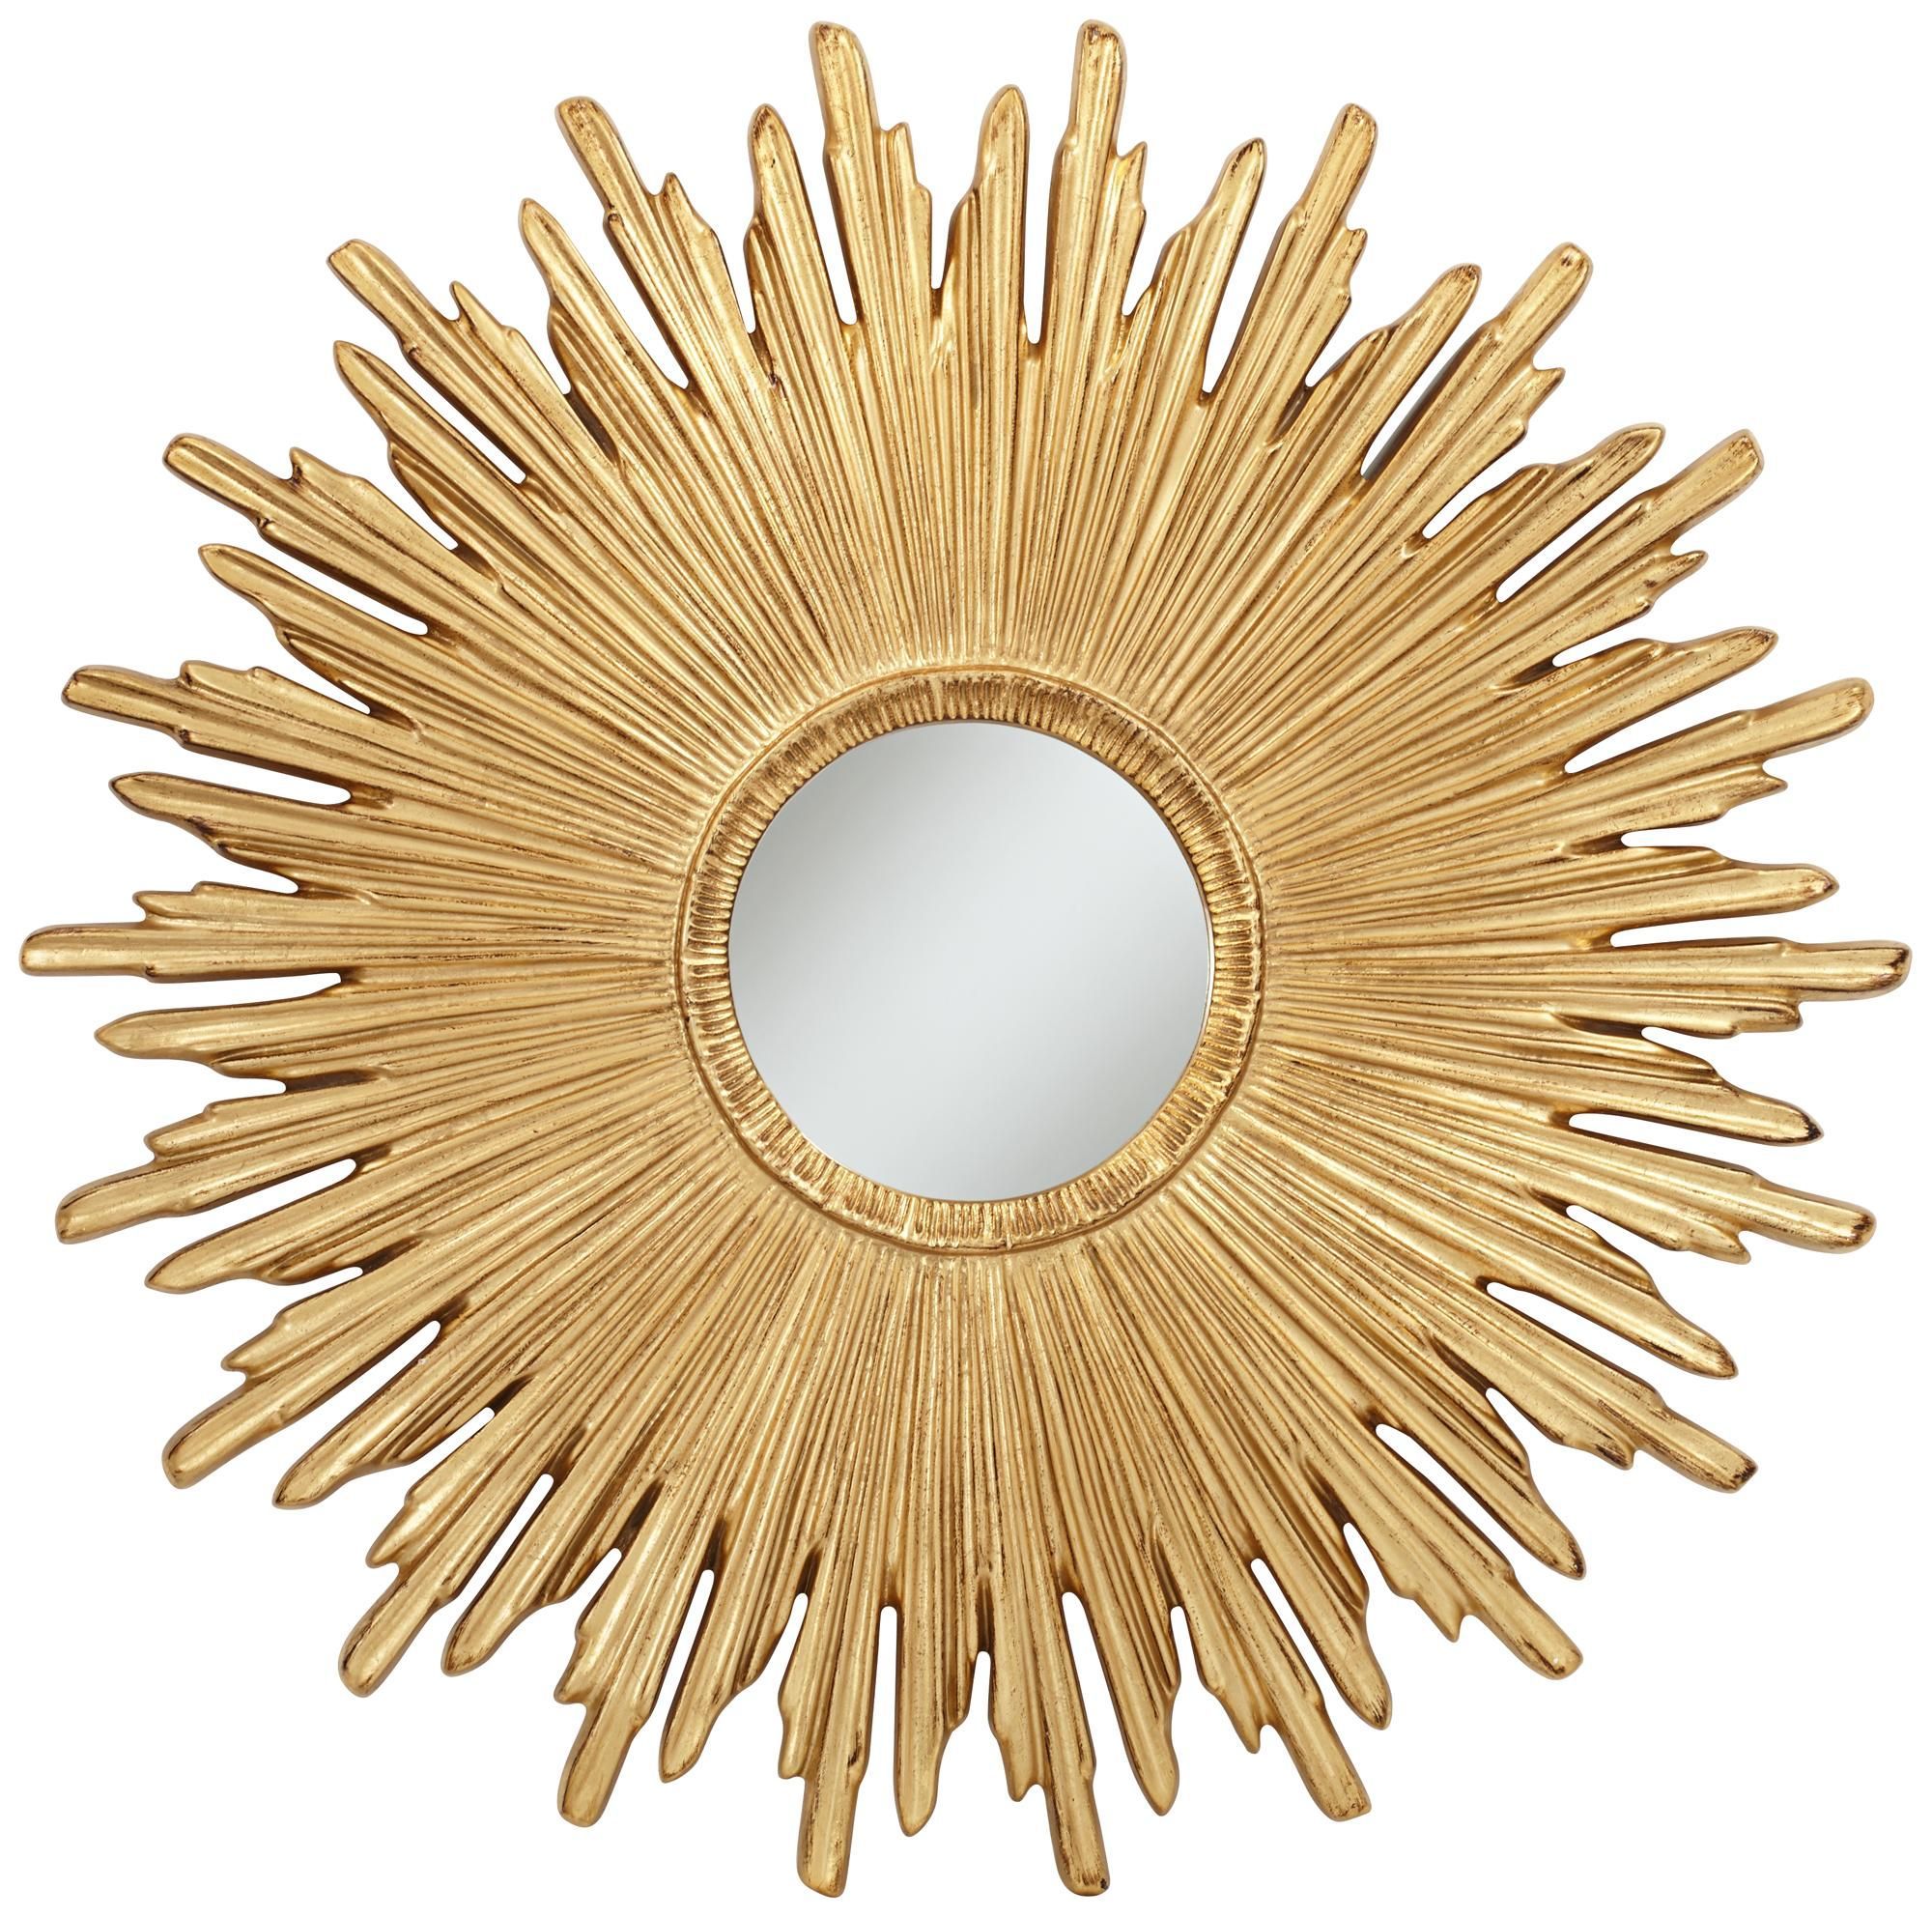 Golden Sunrays 43" Wide Round Wall Mirror | Mirror Wall, Round Wall Regarding Golden Voyage Round Wall Mirrors (View 6 of 15)